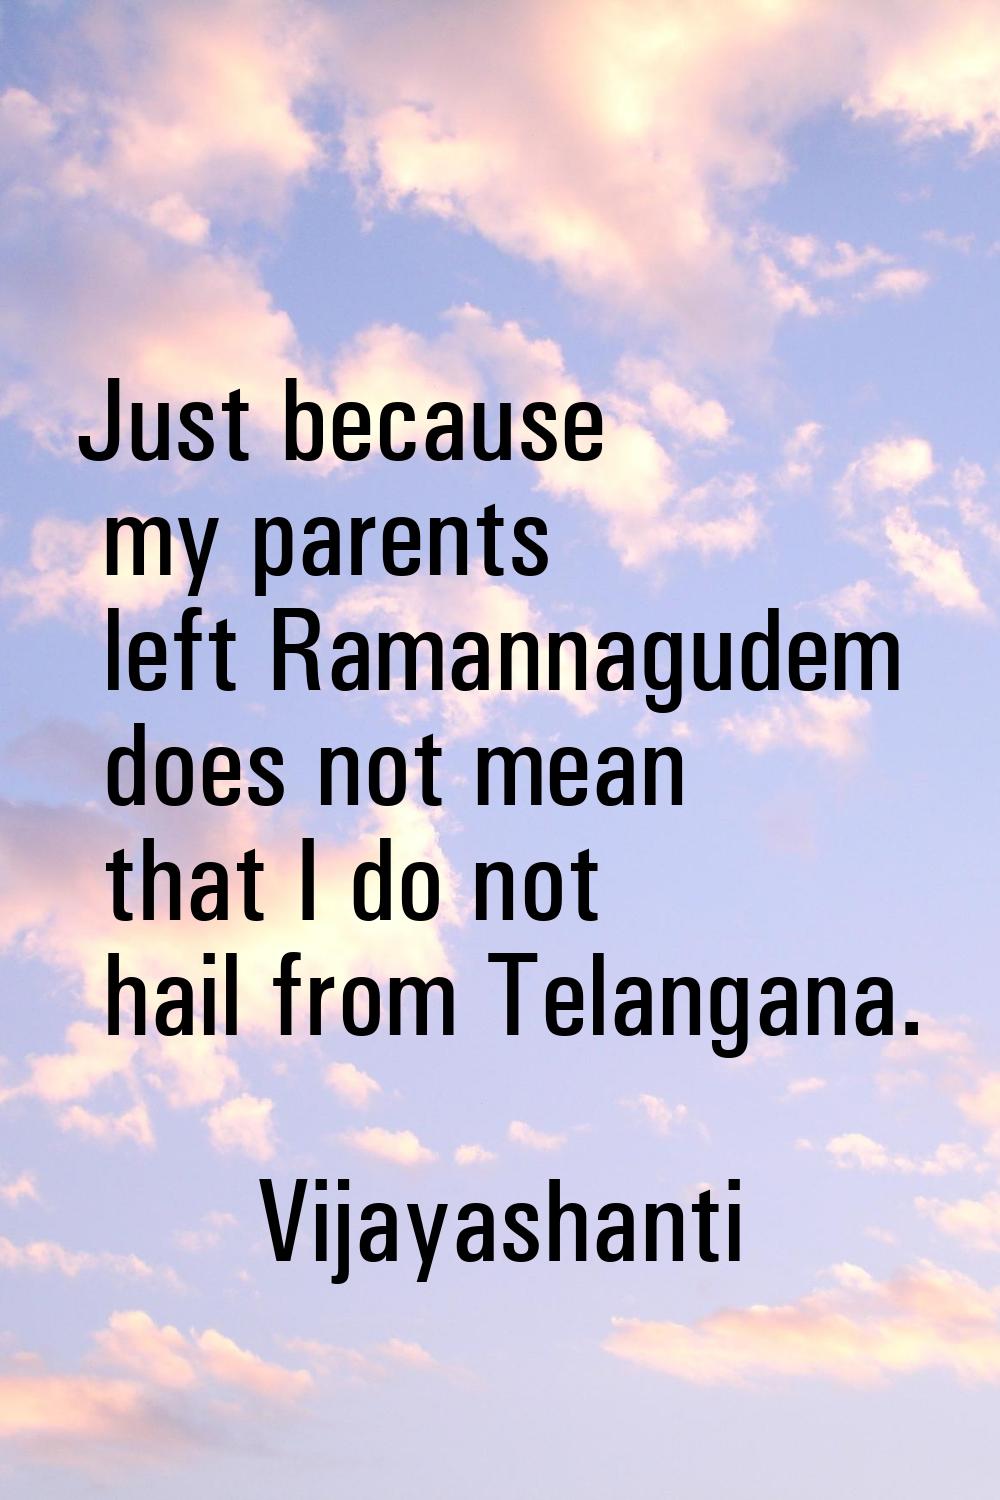 Just because my parents left Ramannagudem does not mean that I do not hail from Telangana.